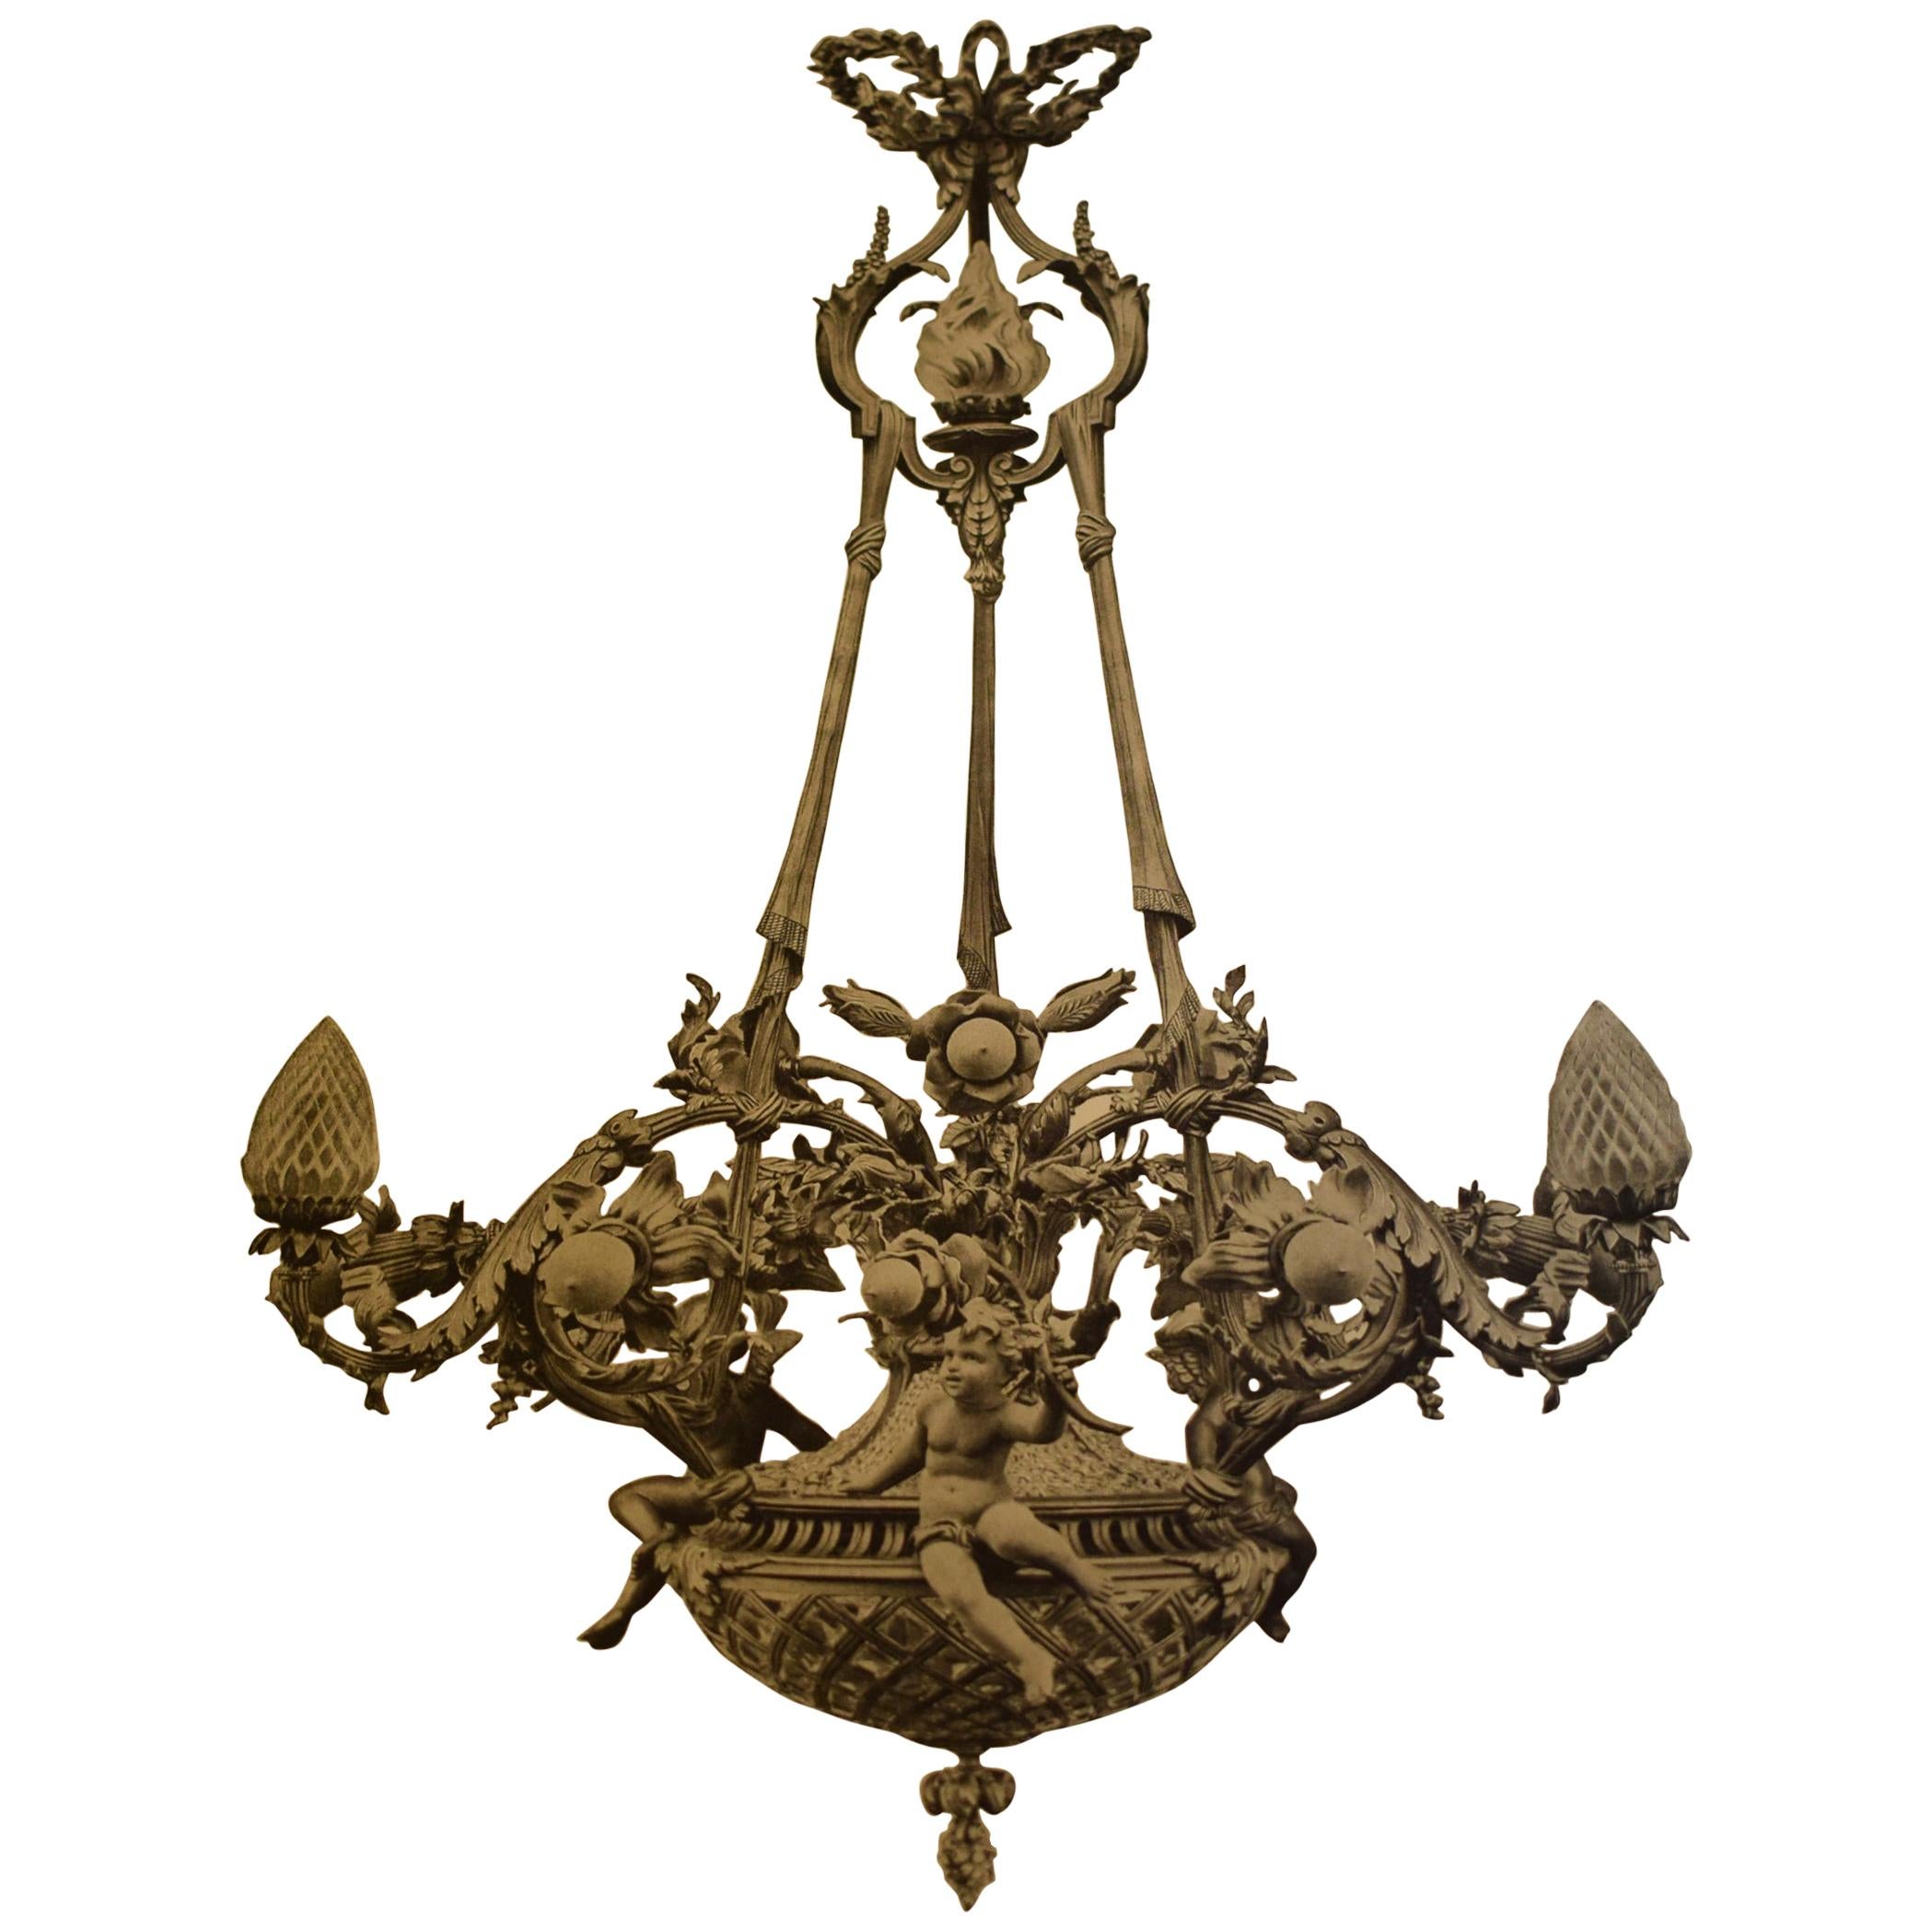 A magnificent gilt bronze, crystal and frosted glass chandelier depicting putti. Exquisite detail. France, circa 1900. A picture of the original catalog is also shown (pg 224).
15 total lights: 12 exterior plus 3 inside the dome
Dimensions: Height